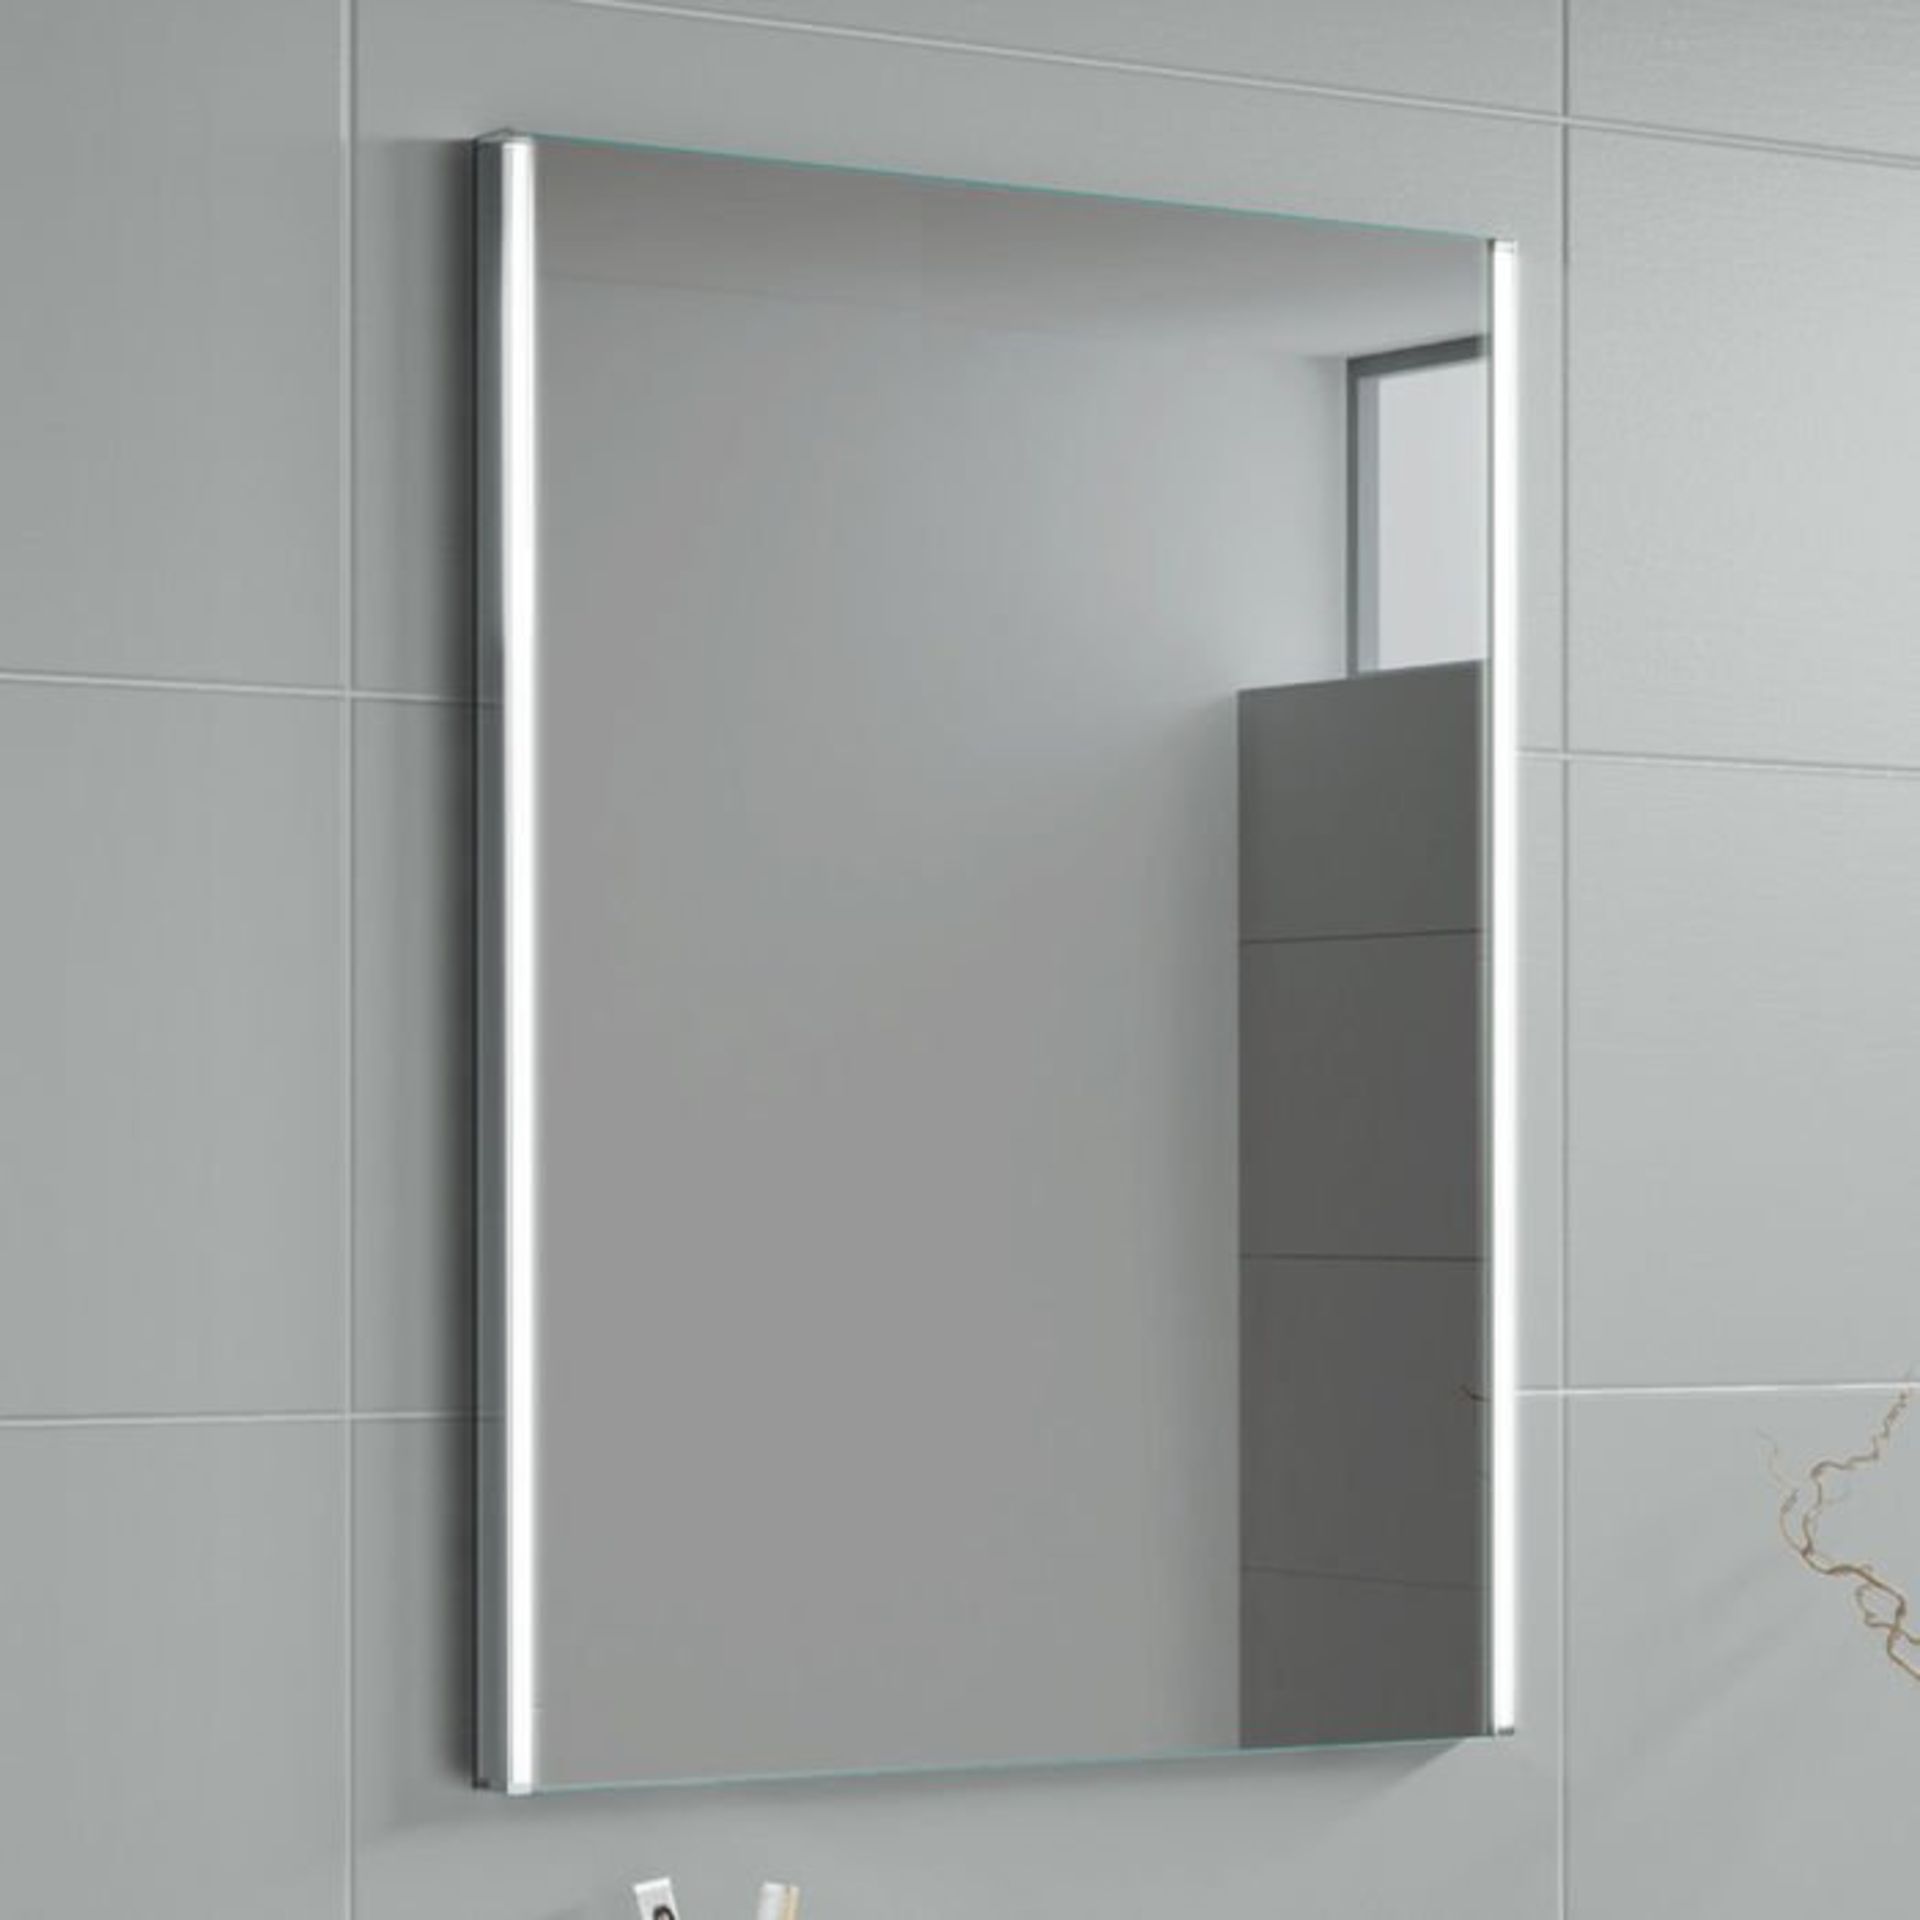 (L207) 500x700mm Lunar LED Mirror - Battery Operated. Energy saving controlled On / Off switch - Image 2 of 3